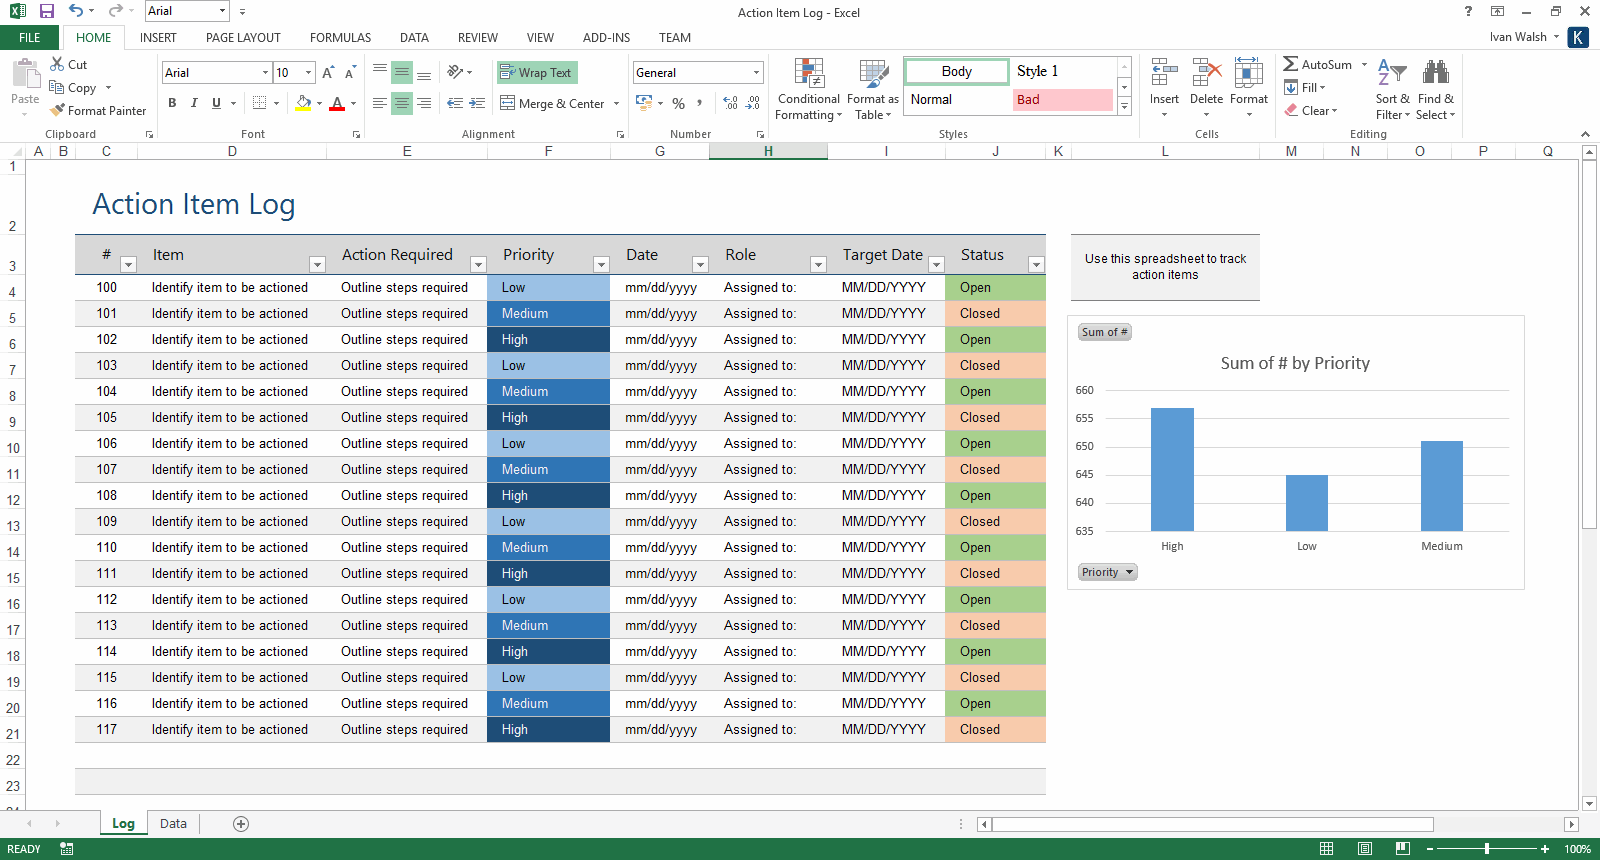 free project planning tools excel